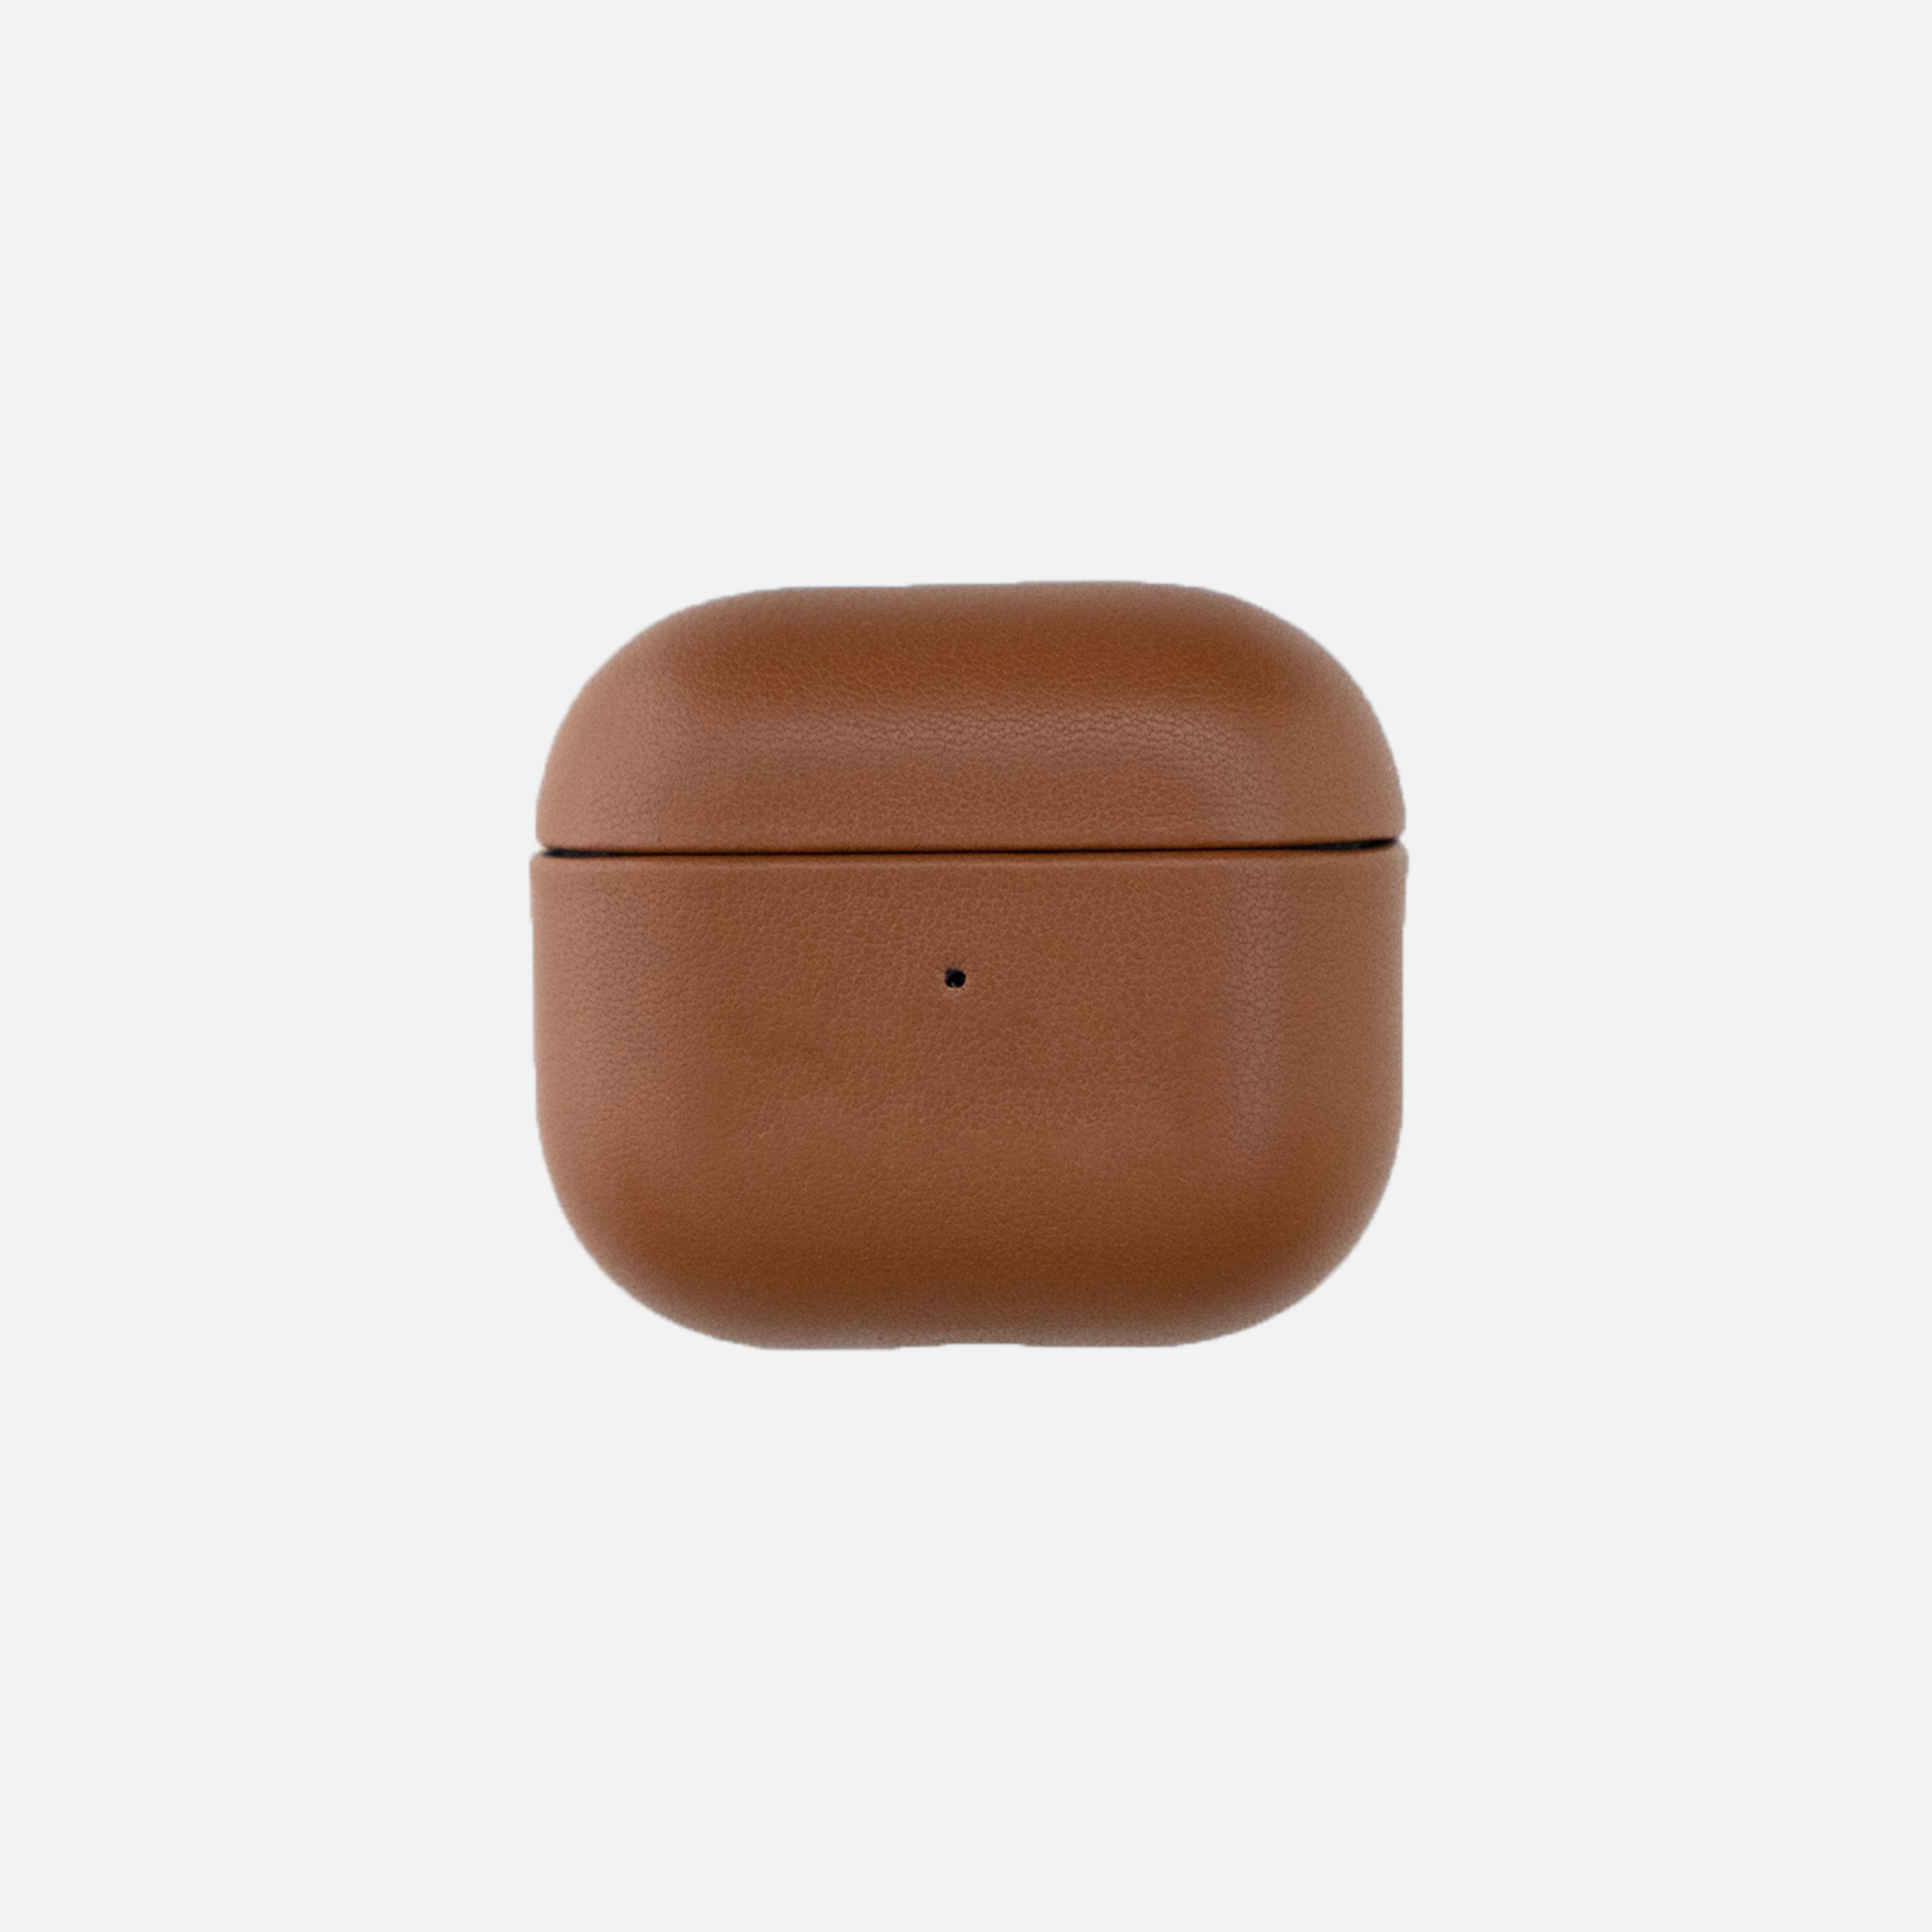 Dawson Leather Airpods 3 Case in Brown - Kastemize